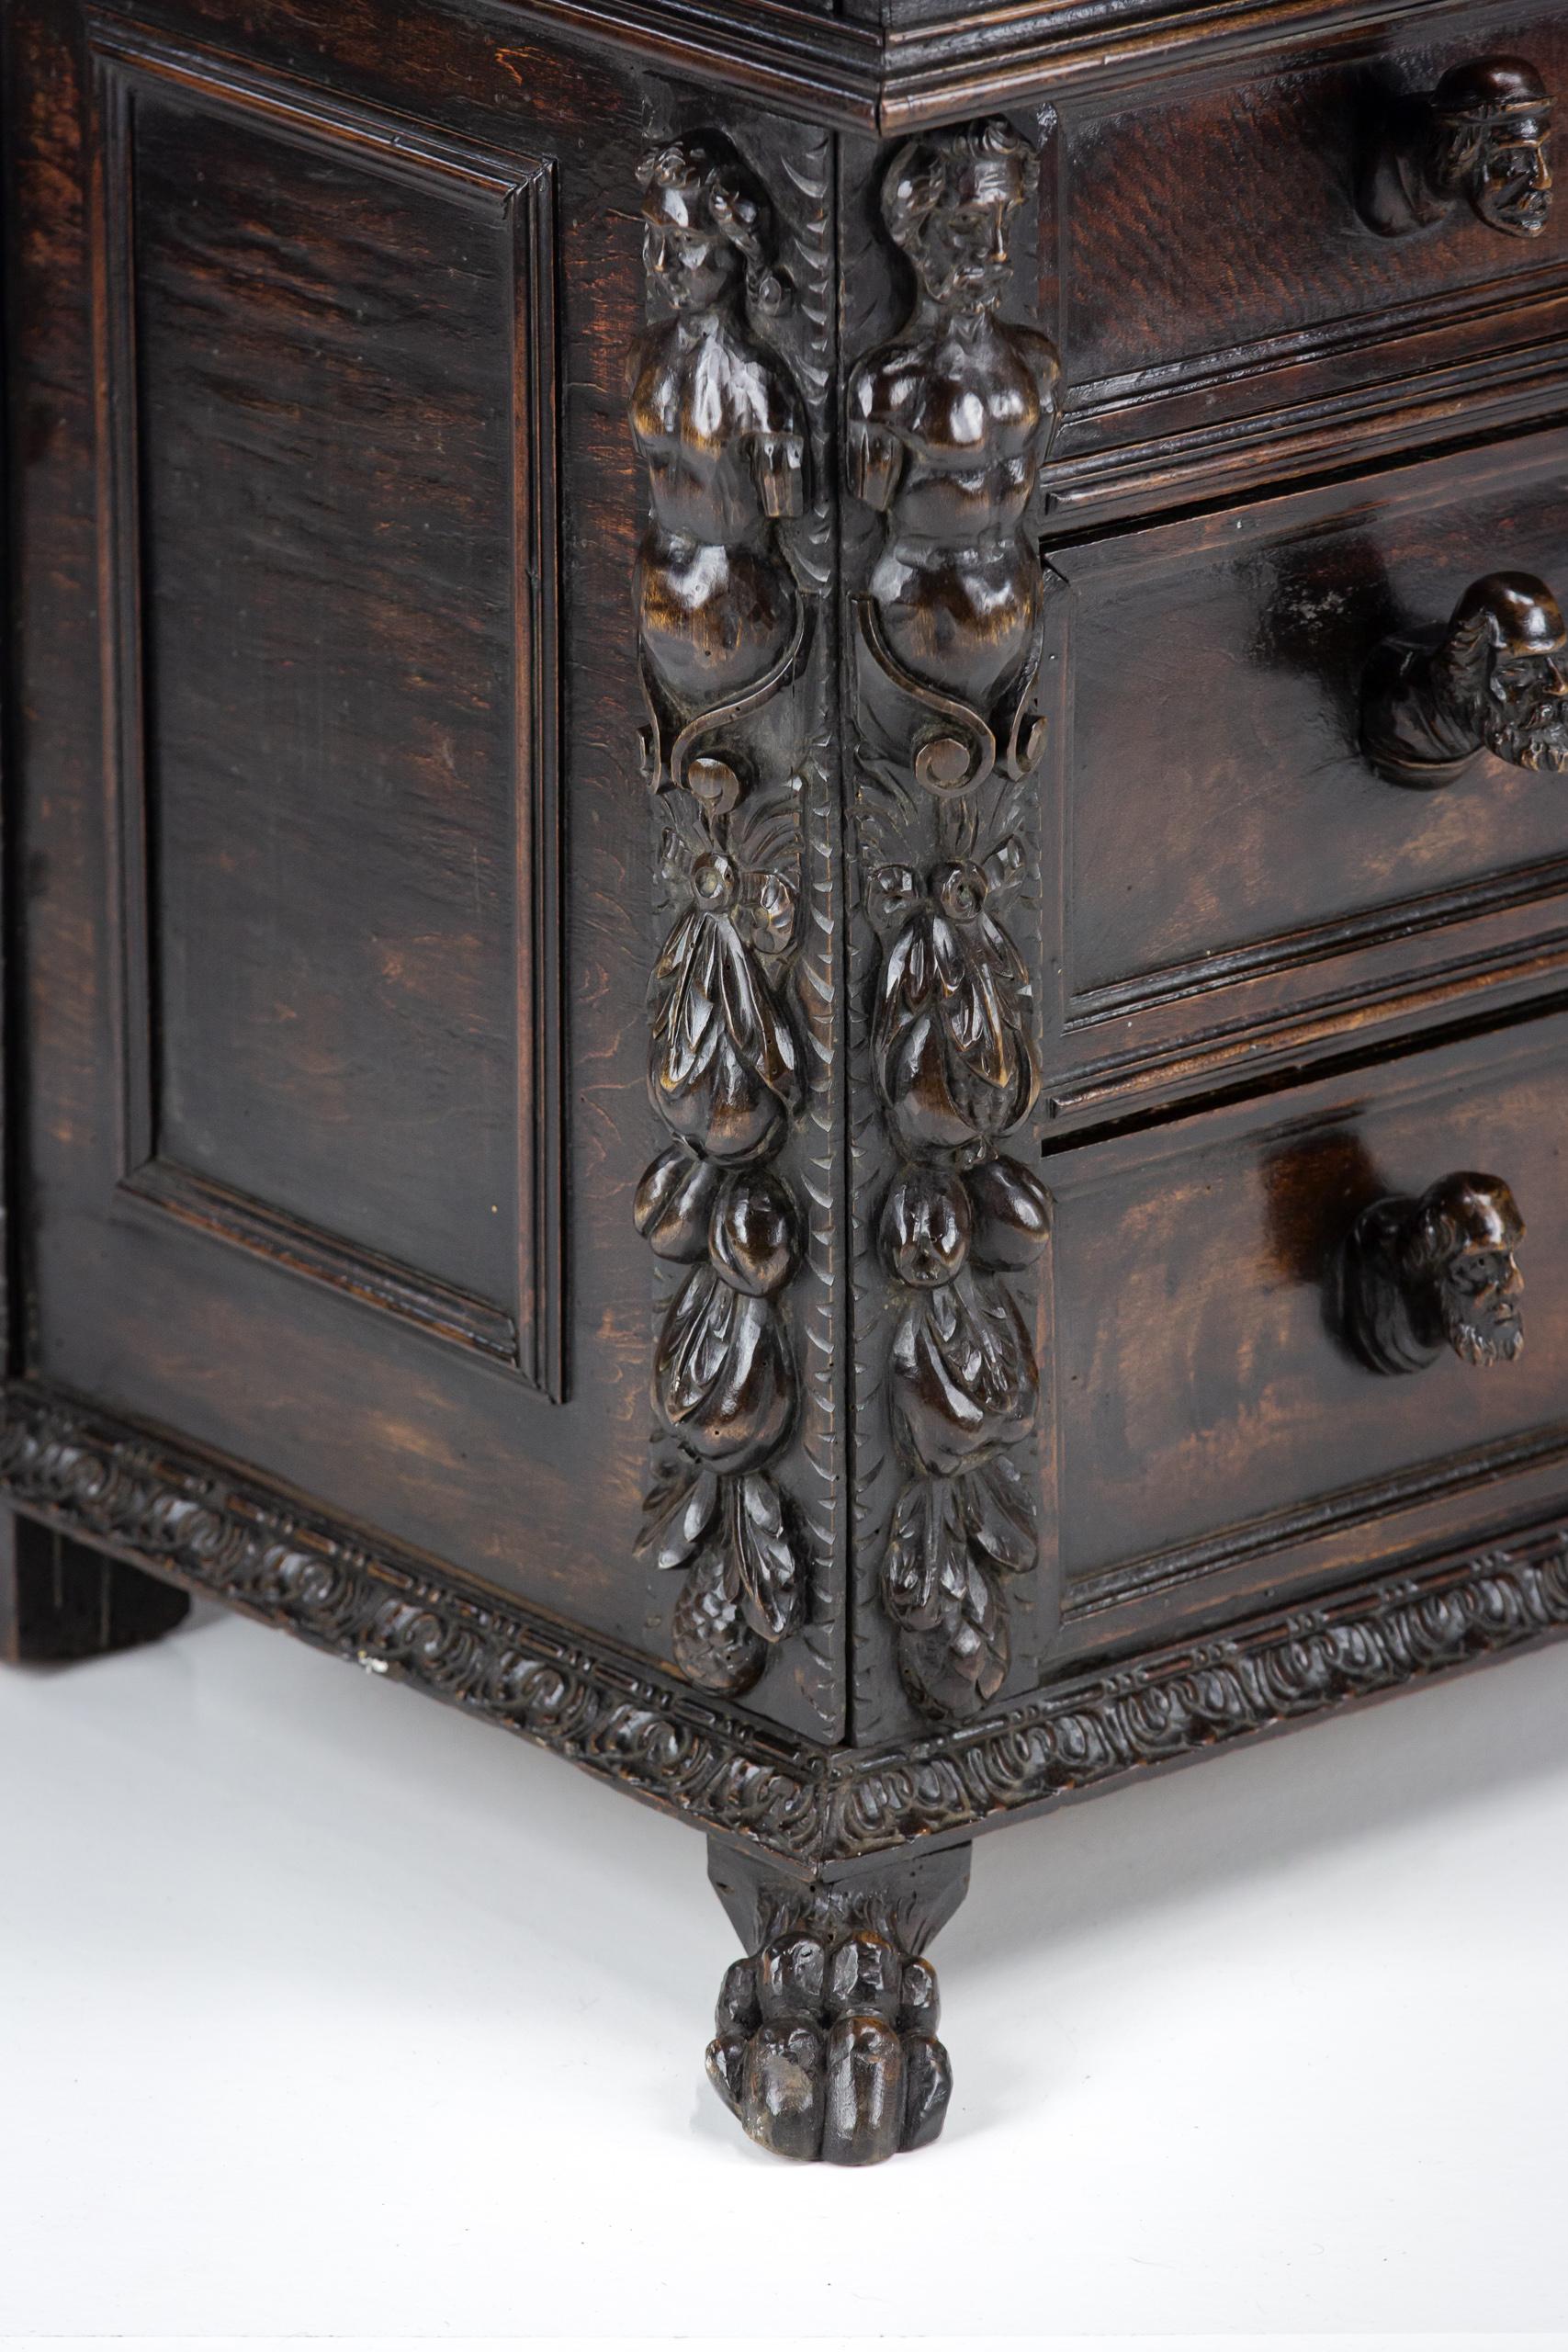 Late 17th or Early 18th Century Walnut Bambocci Commode For Sale 2